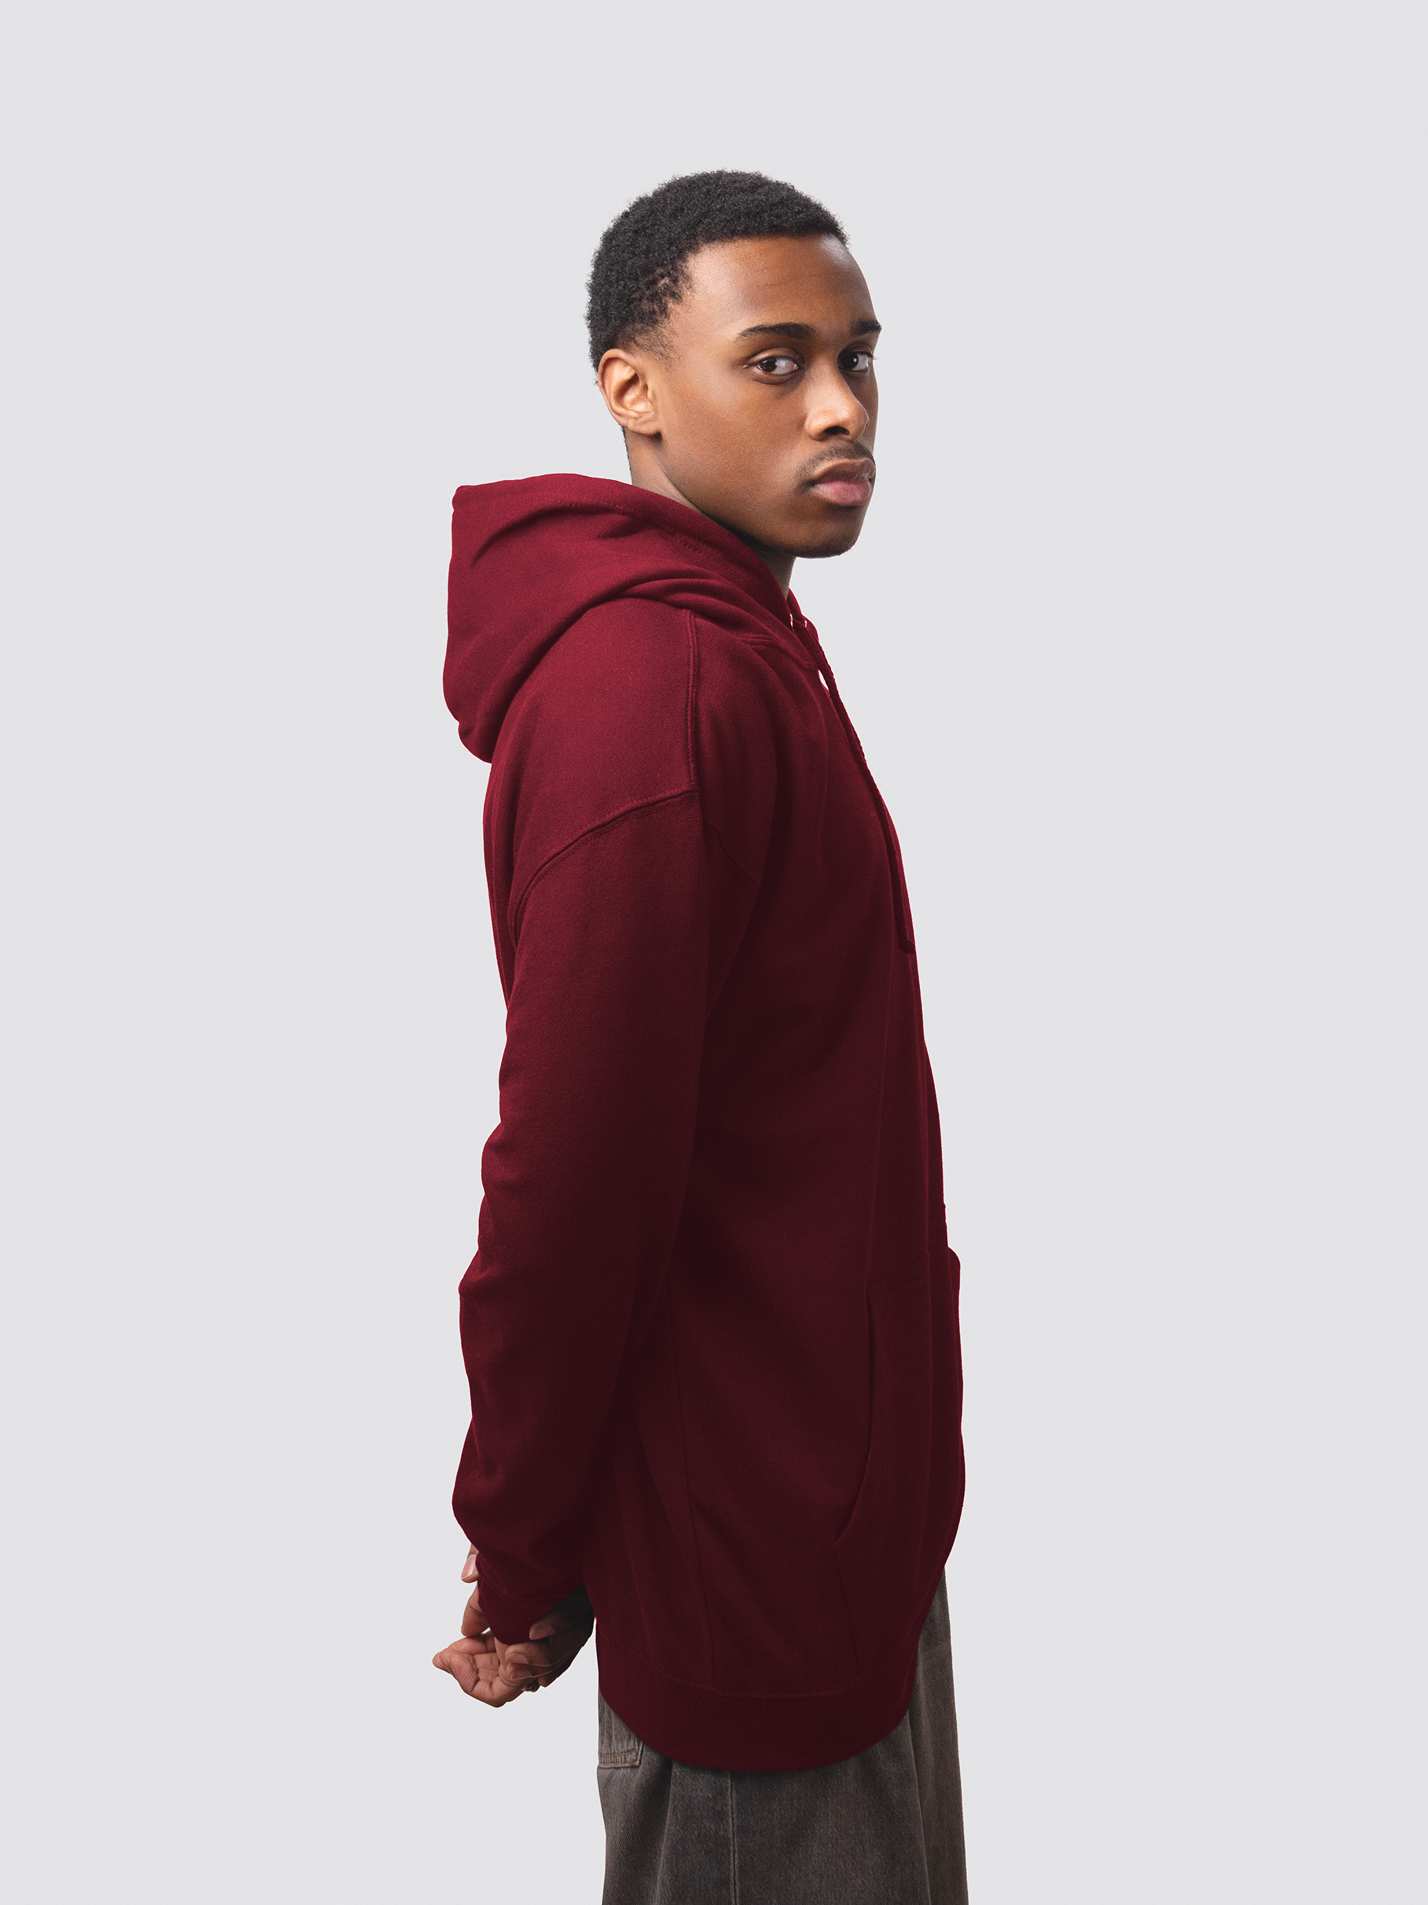 Churchill College hoodie, made from burgundy cotton-faced fabric